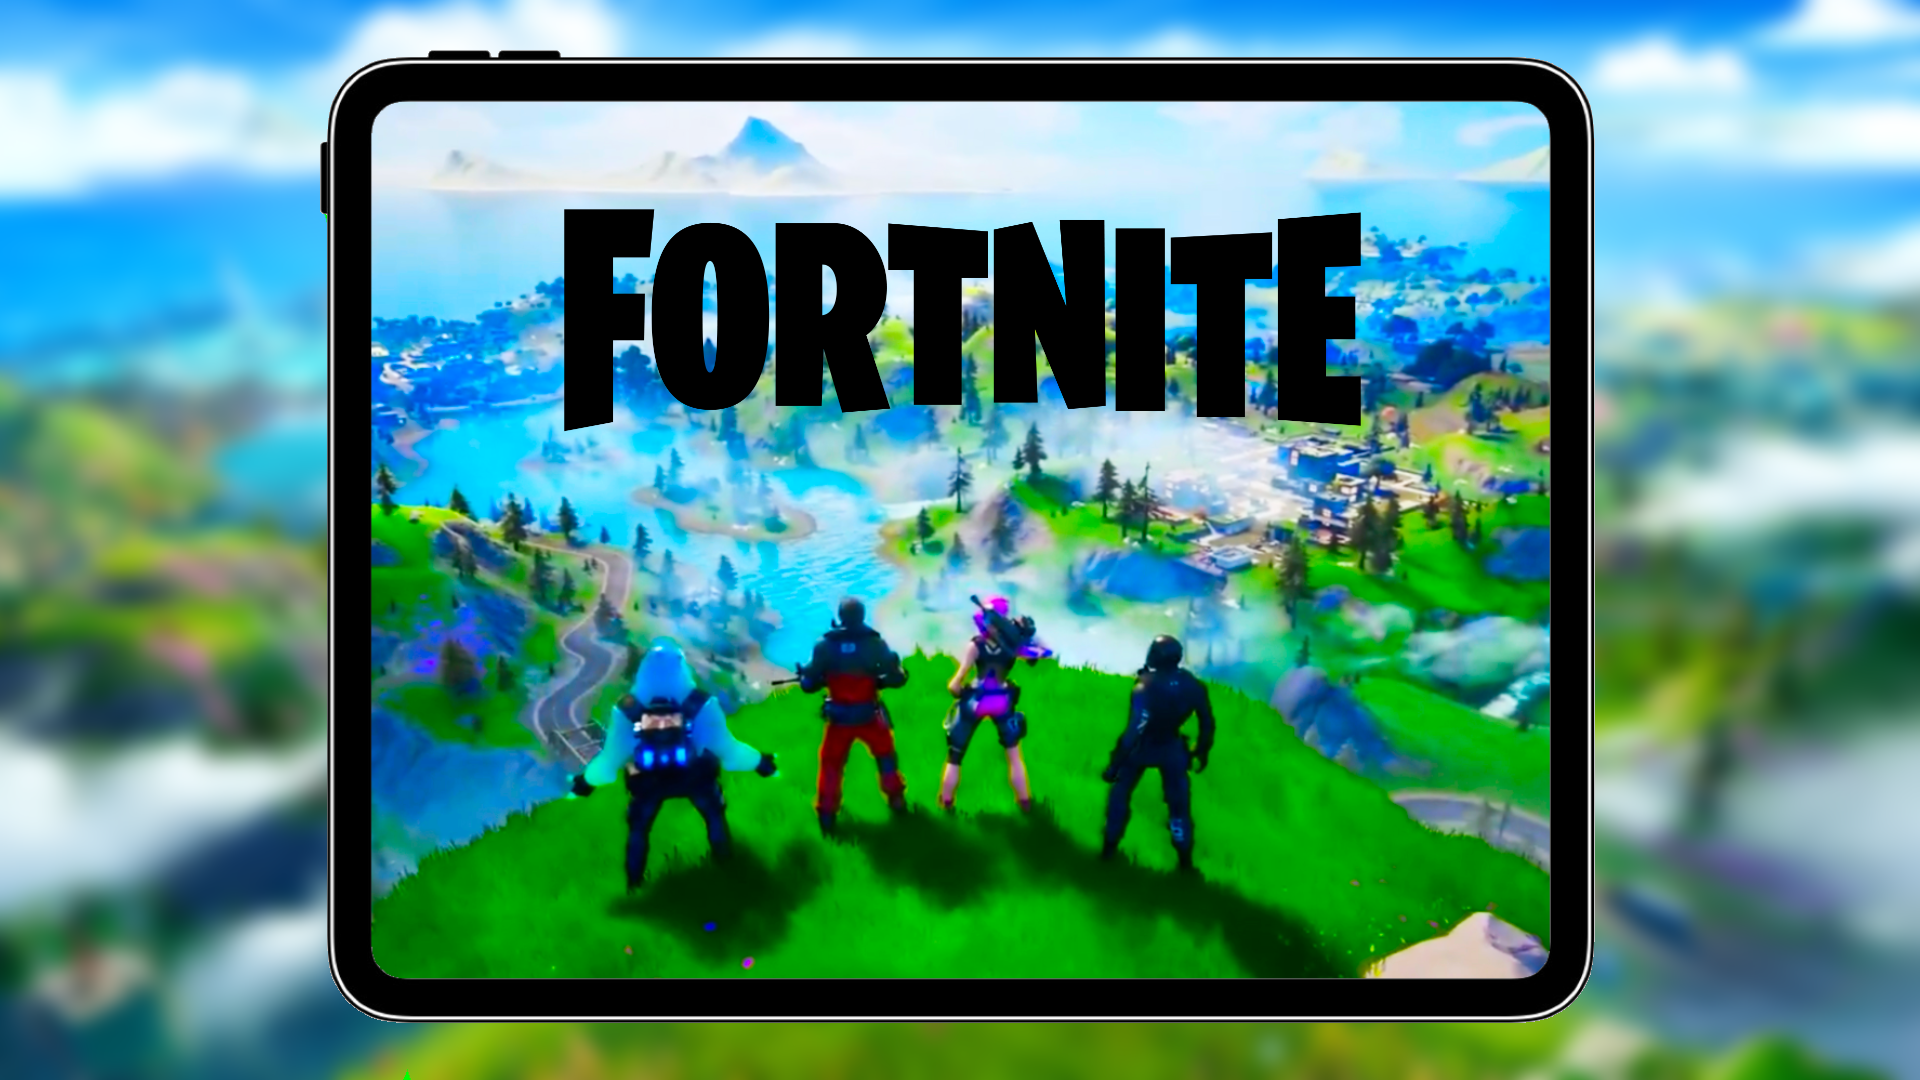 Fortnite coming back to iOS (in the EU) through new 'Epic Store